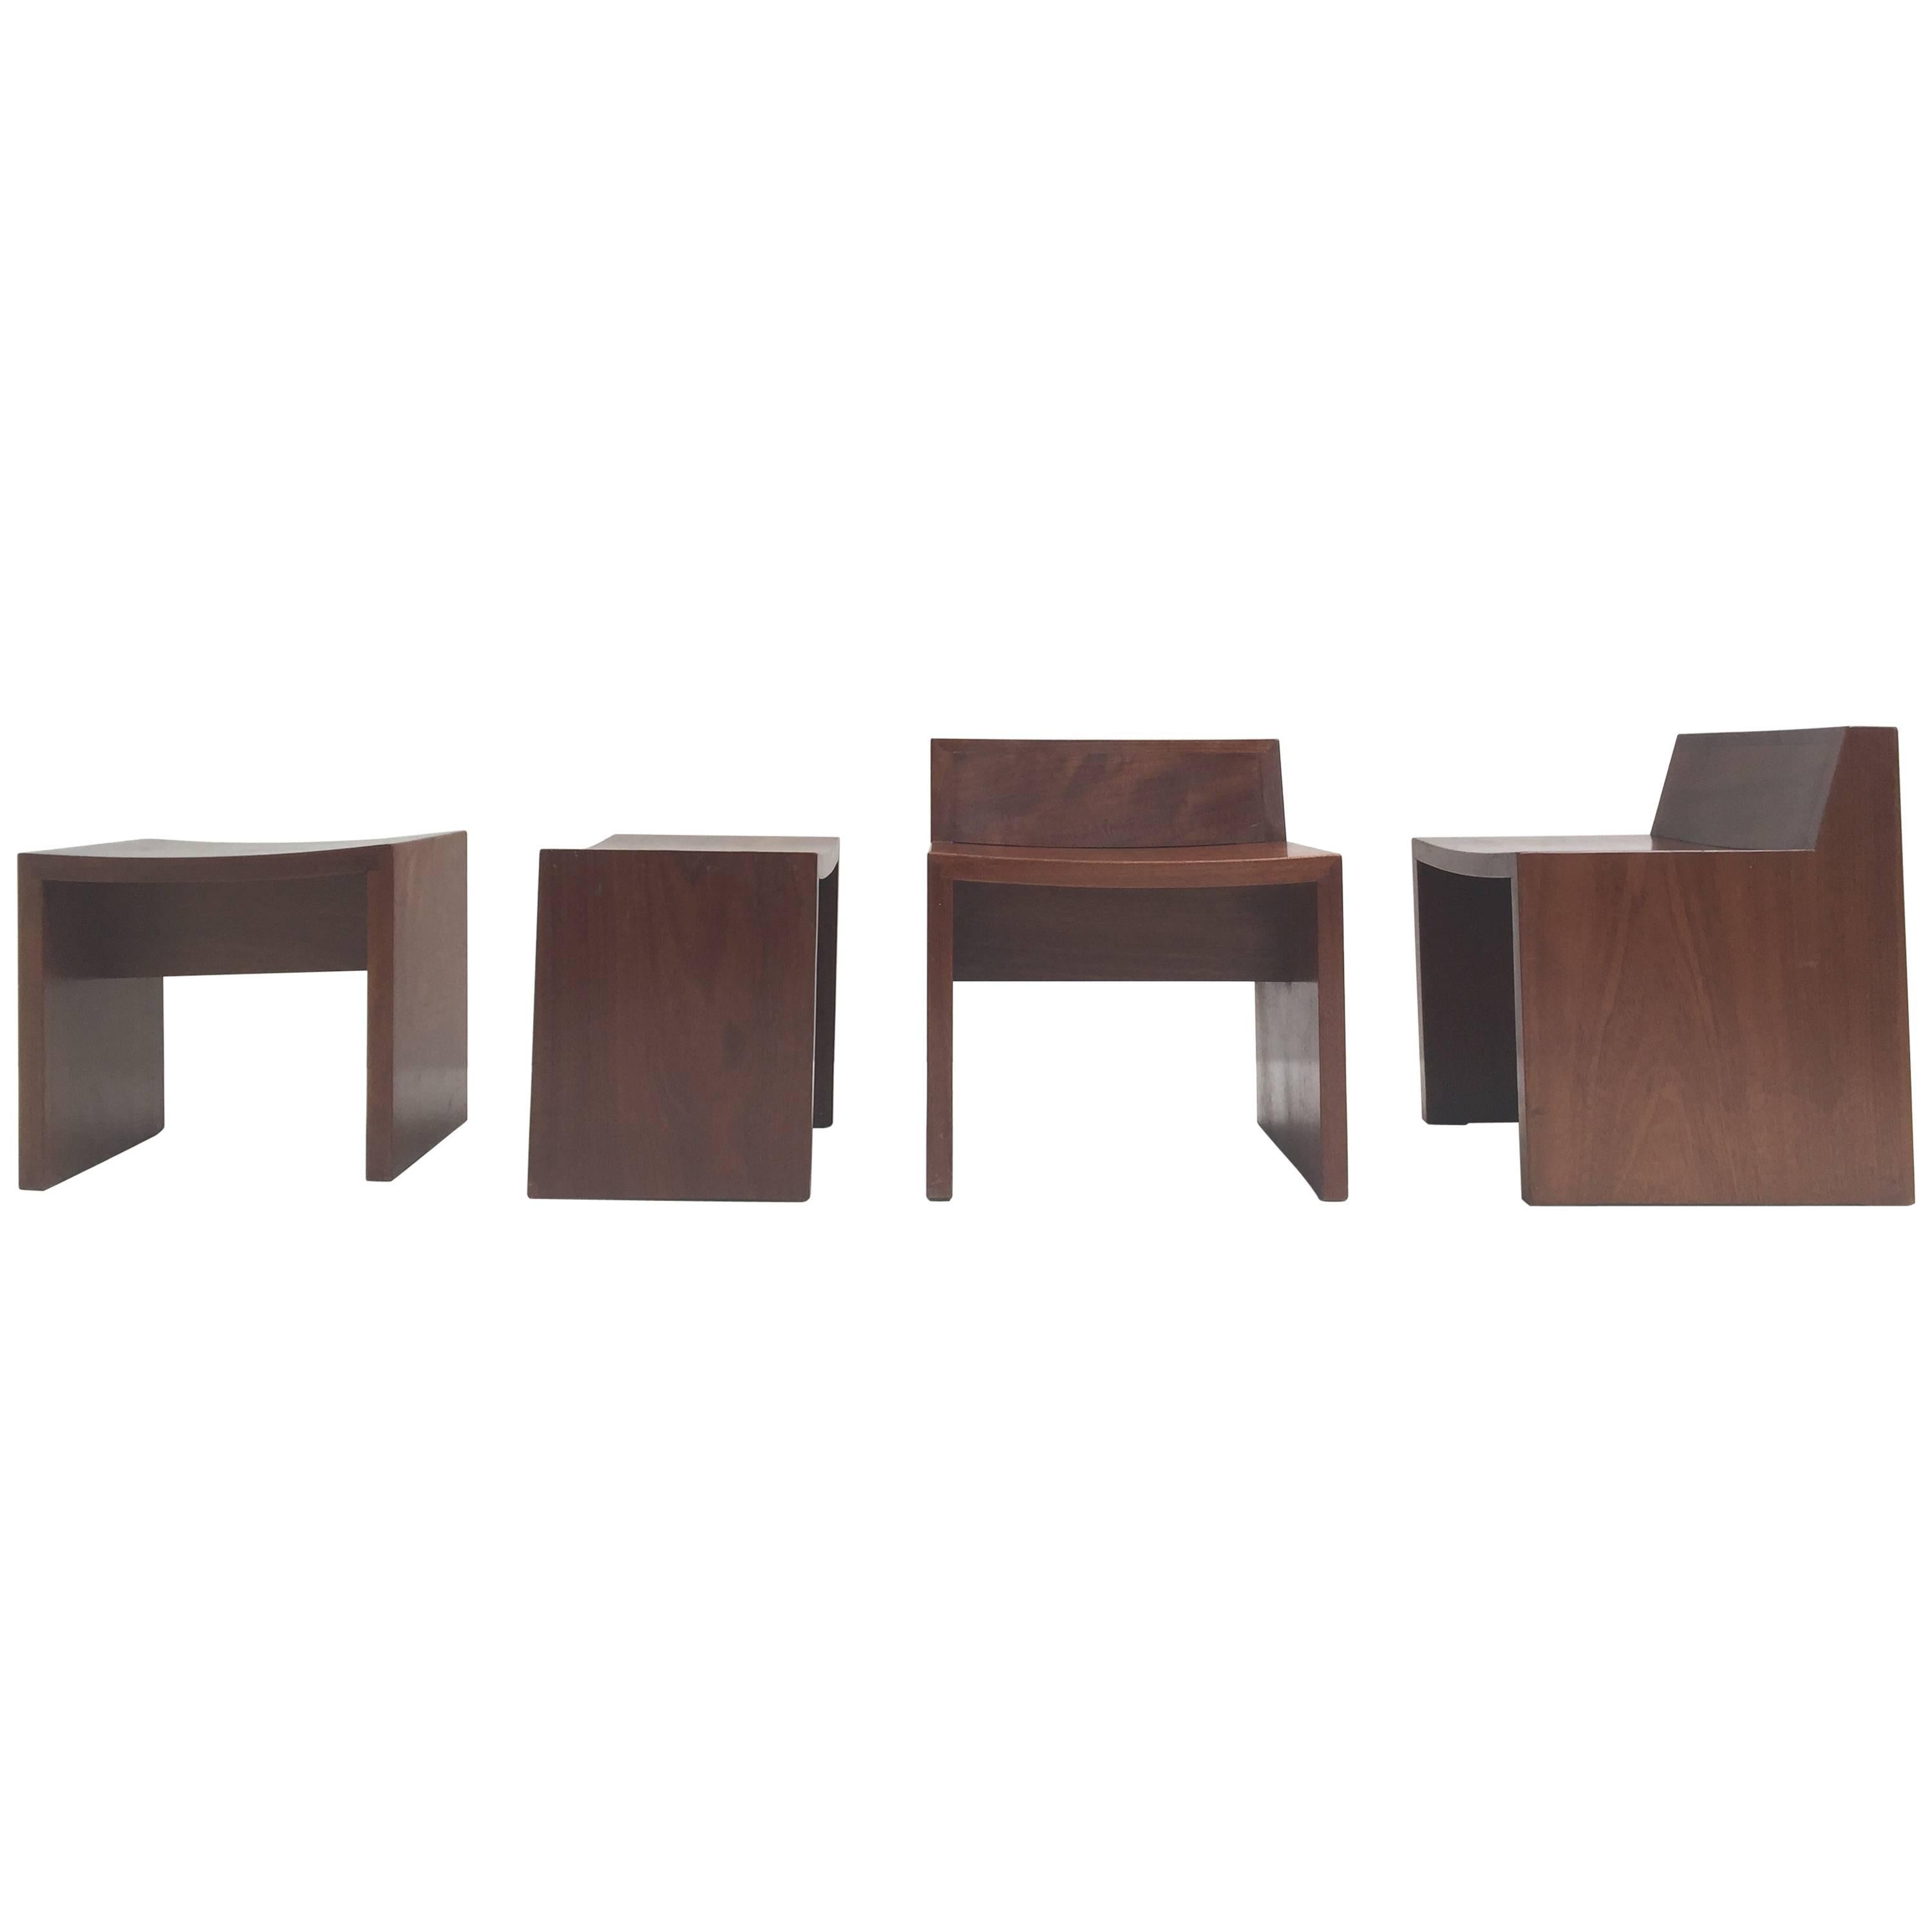 Unique Set of Solid Mahogany Church Seats by Dutch Architect Harry Nefkens, 1963